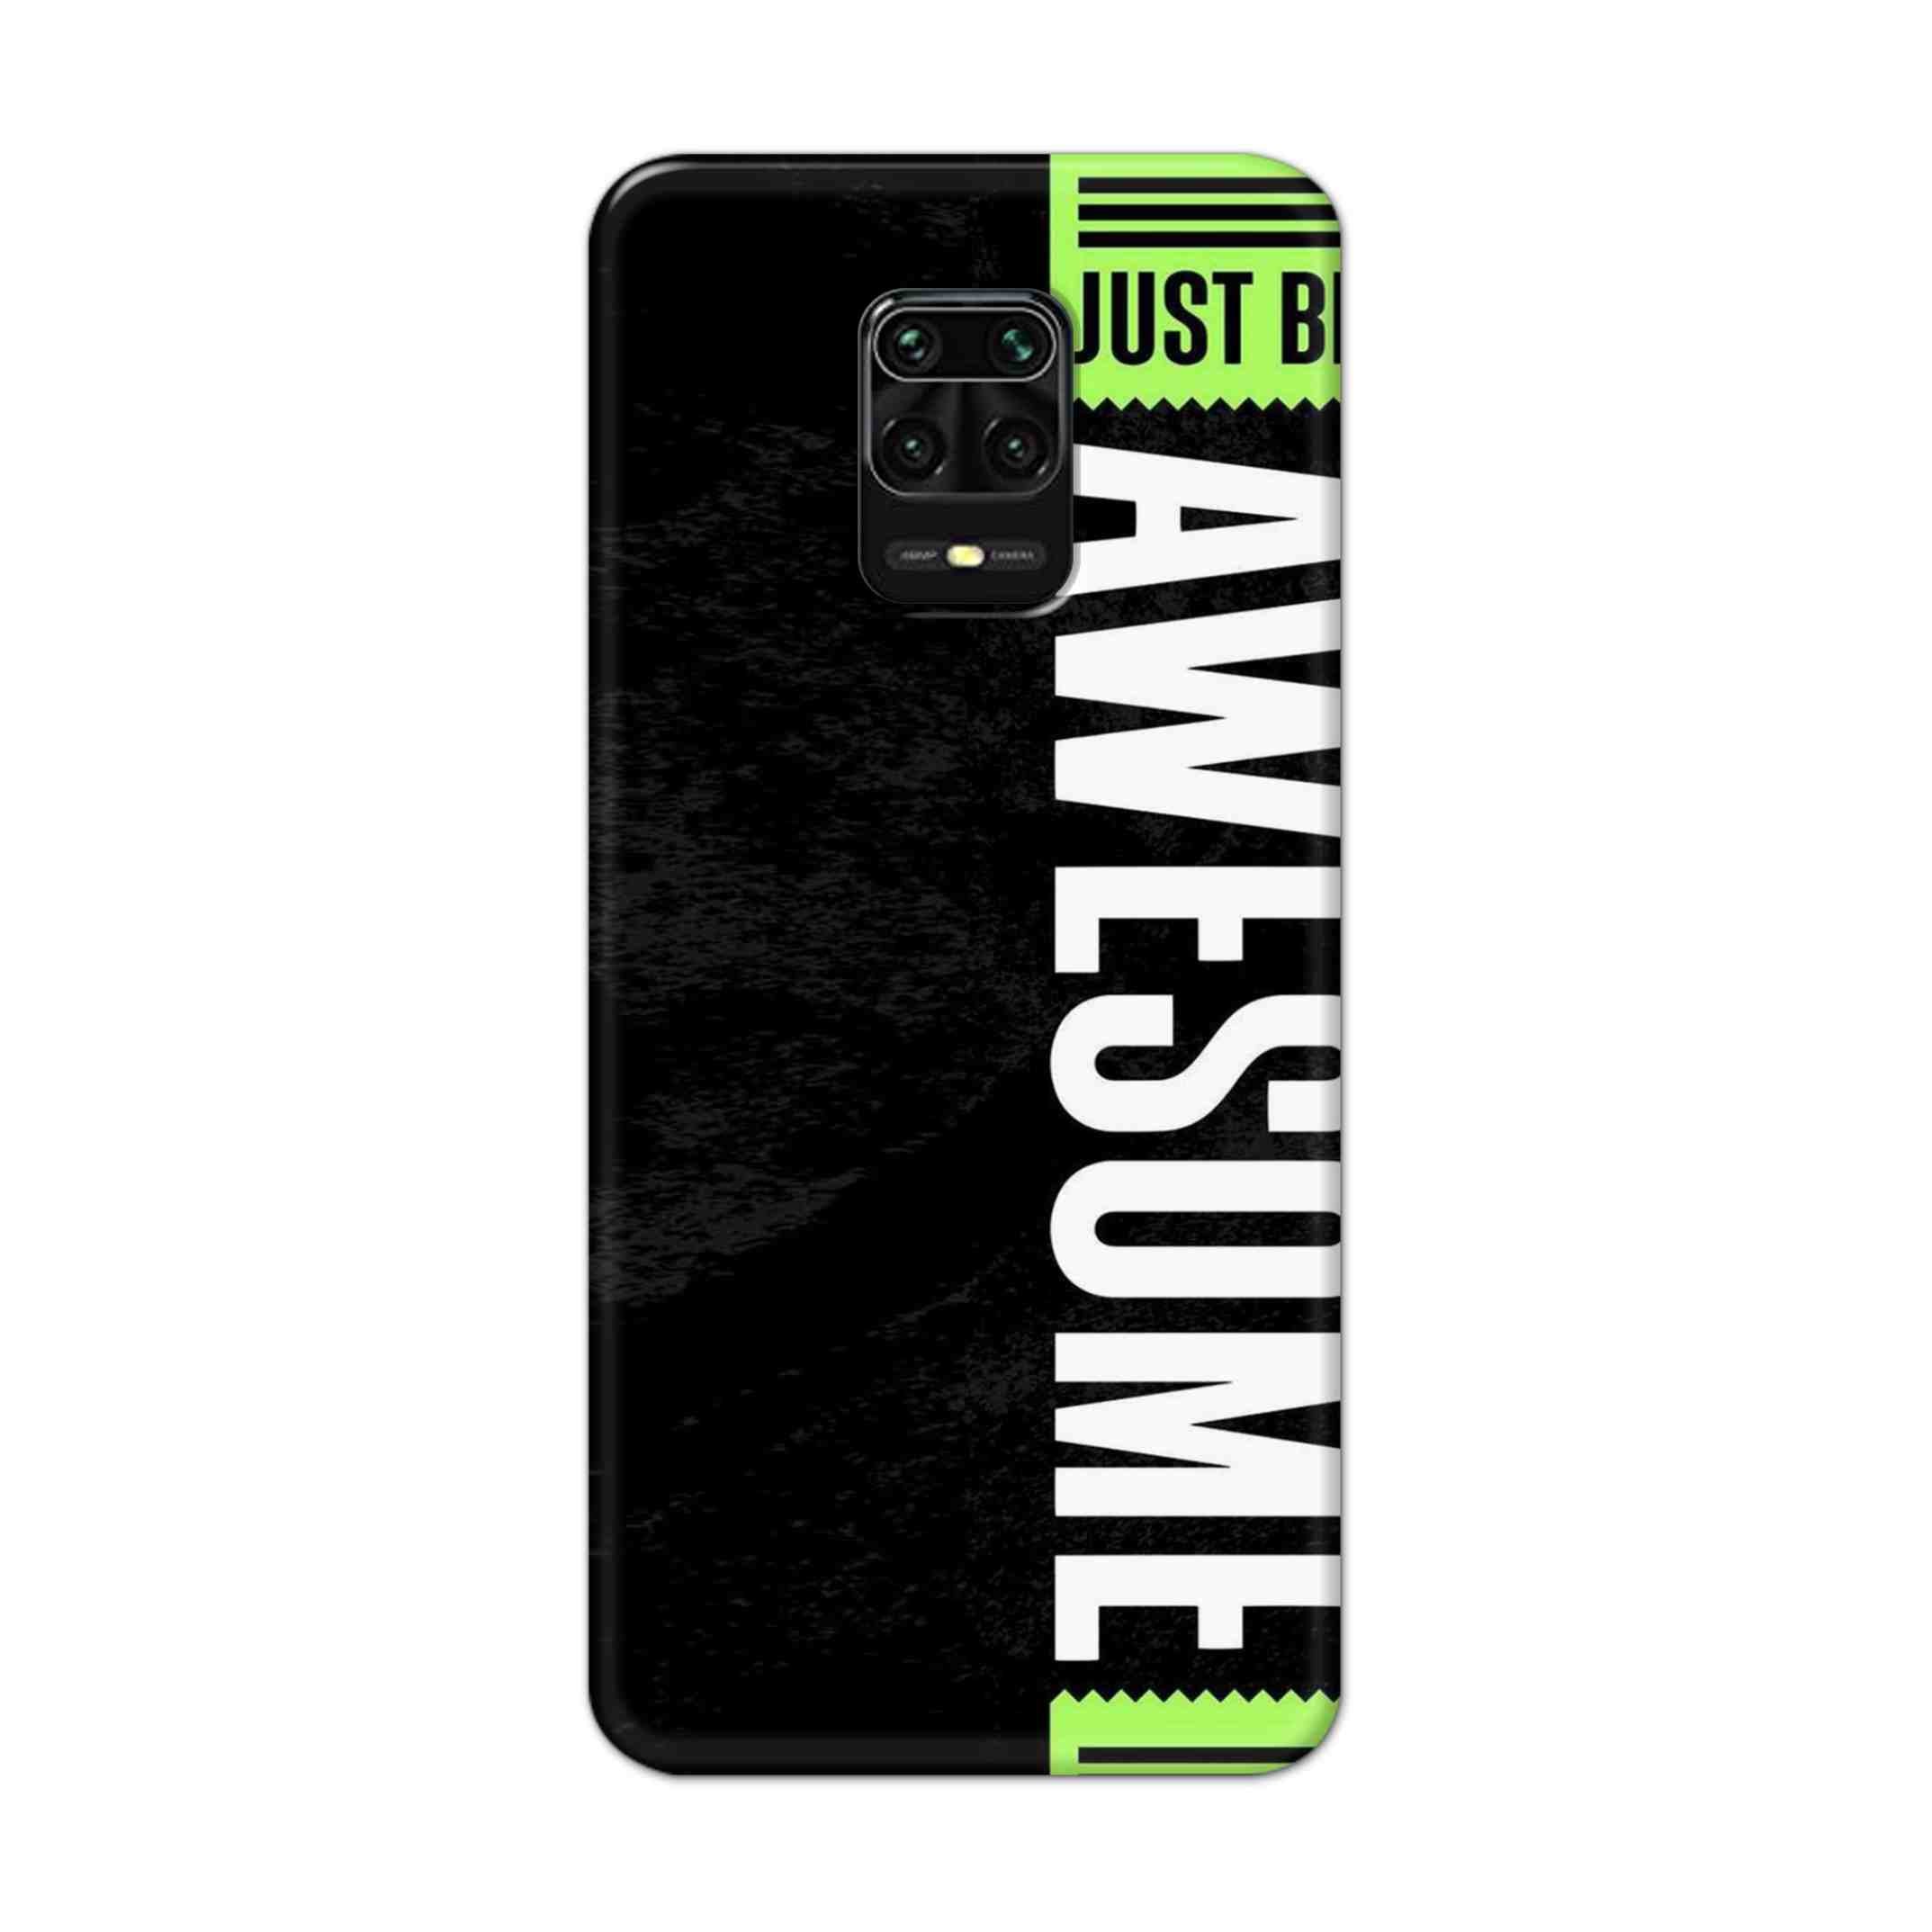 Buy Awesome Street Hard Back Mobile Phone Case Cover For Redmi Note 9 Pro Online